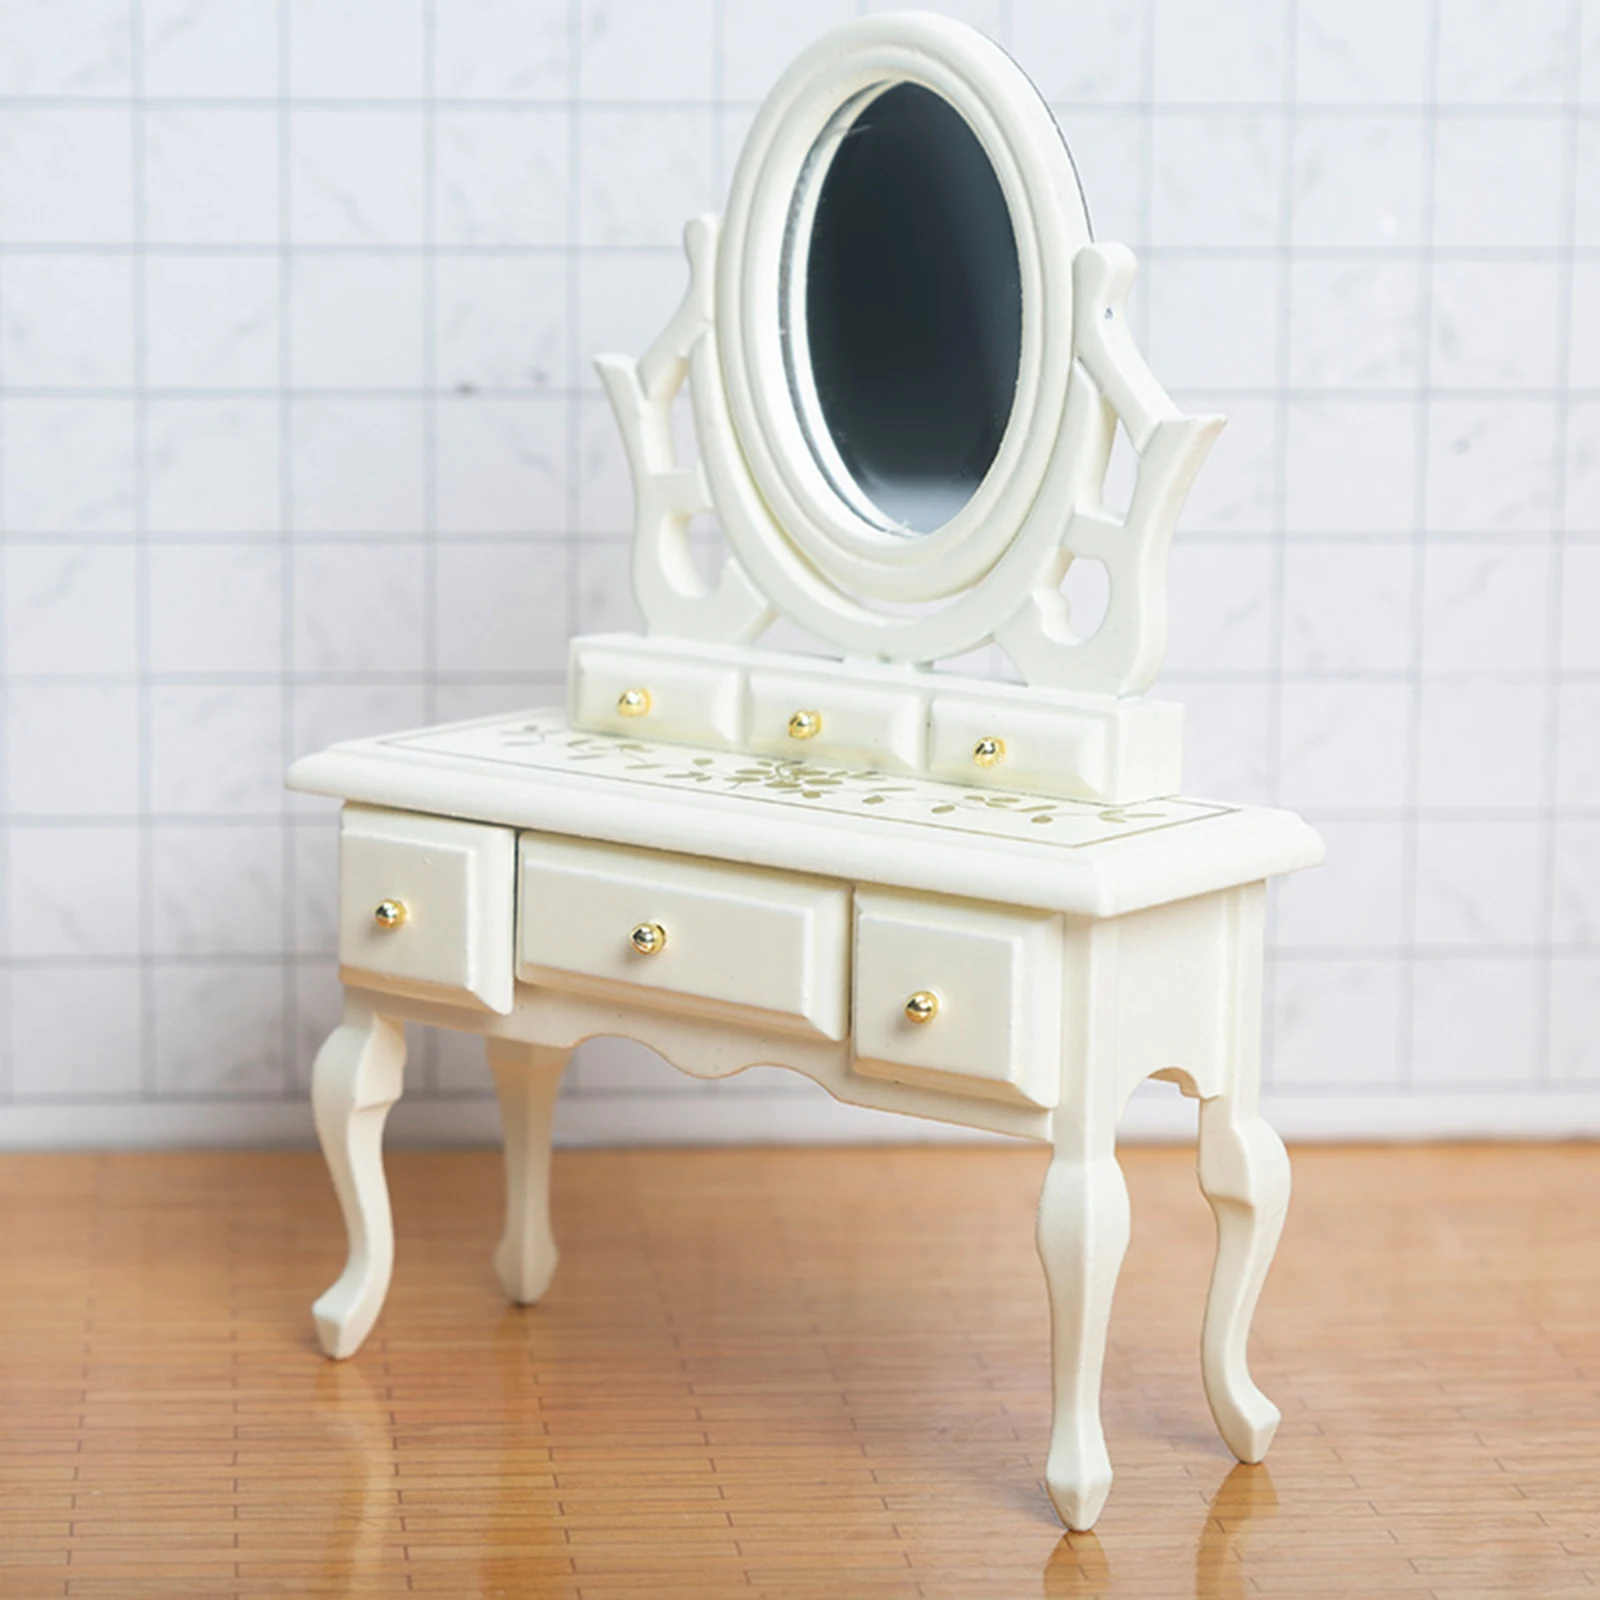 Plywood Dresser Table Chic Antique Mirror Makeup Vanity Table 12th Doll House Creative Modern Furniture Model Accessory Toys